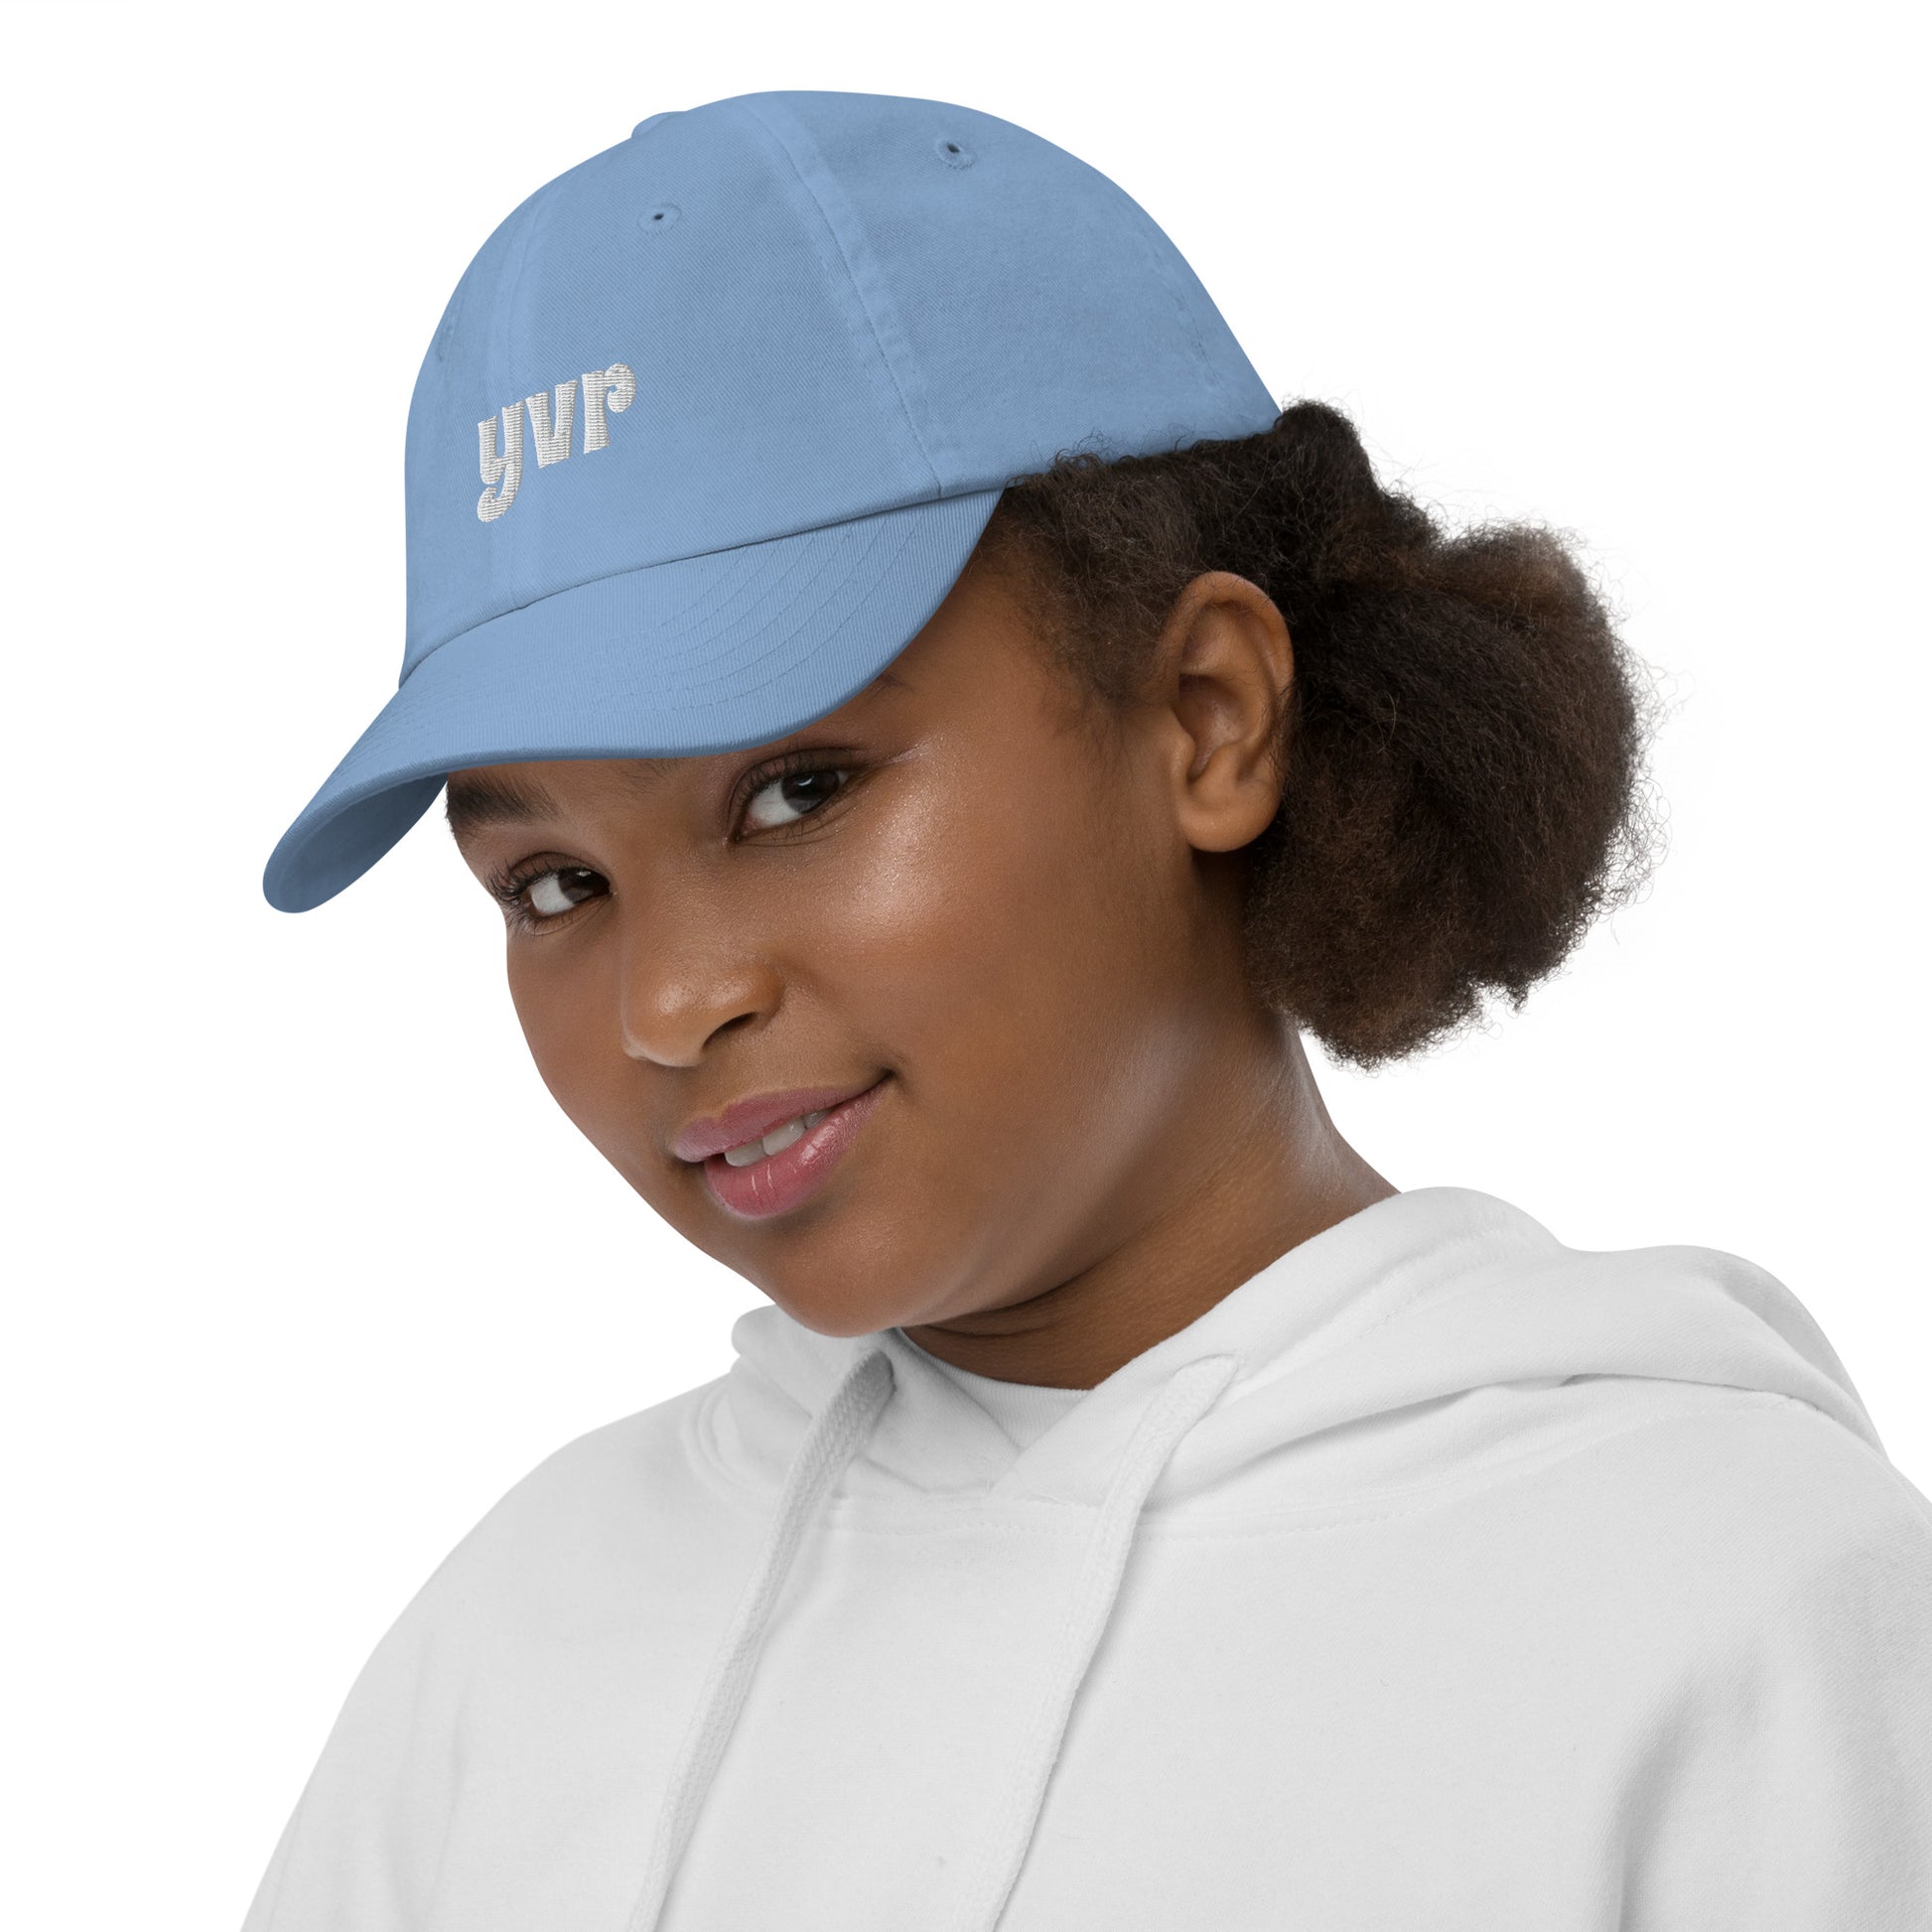 Groovy Kid's Baseball Cap - White • YVR Vancouver • YHM Designs - Image 09